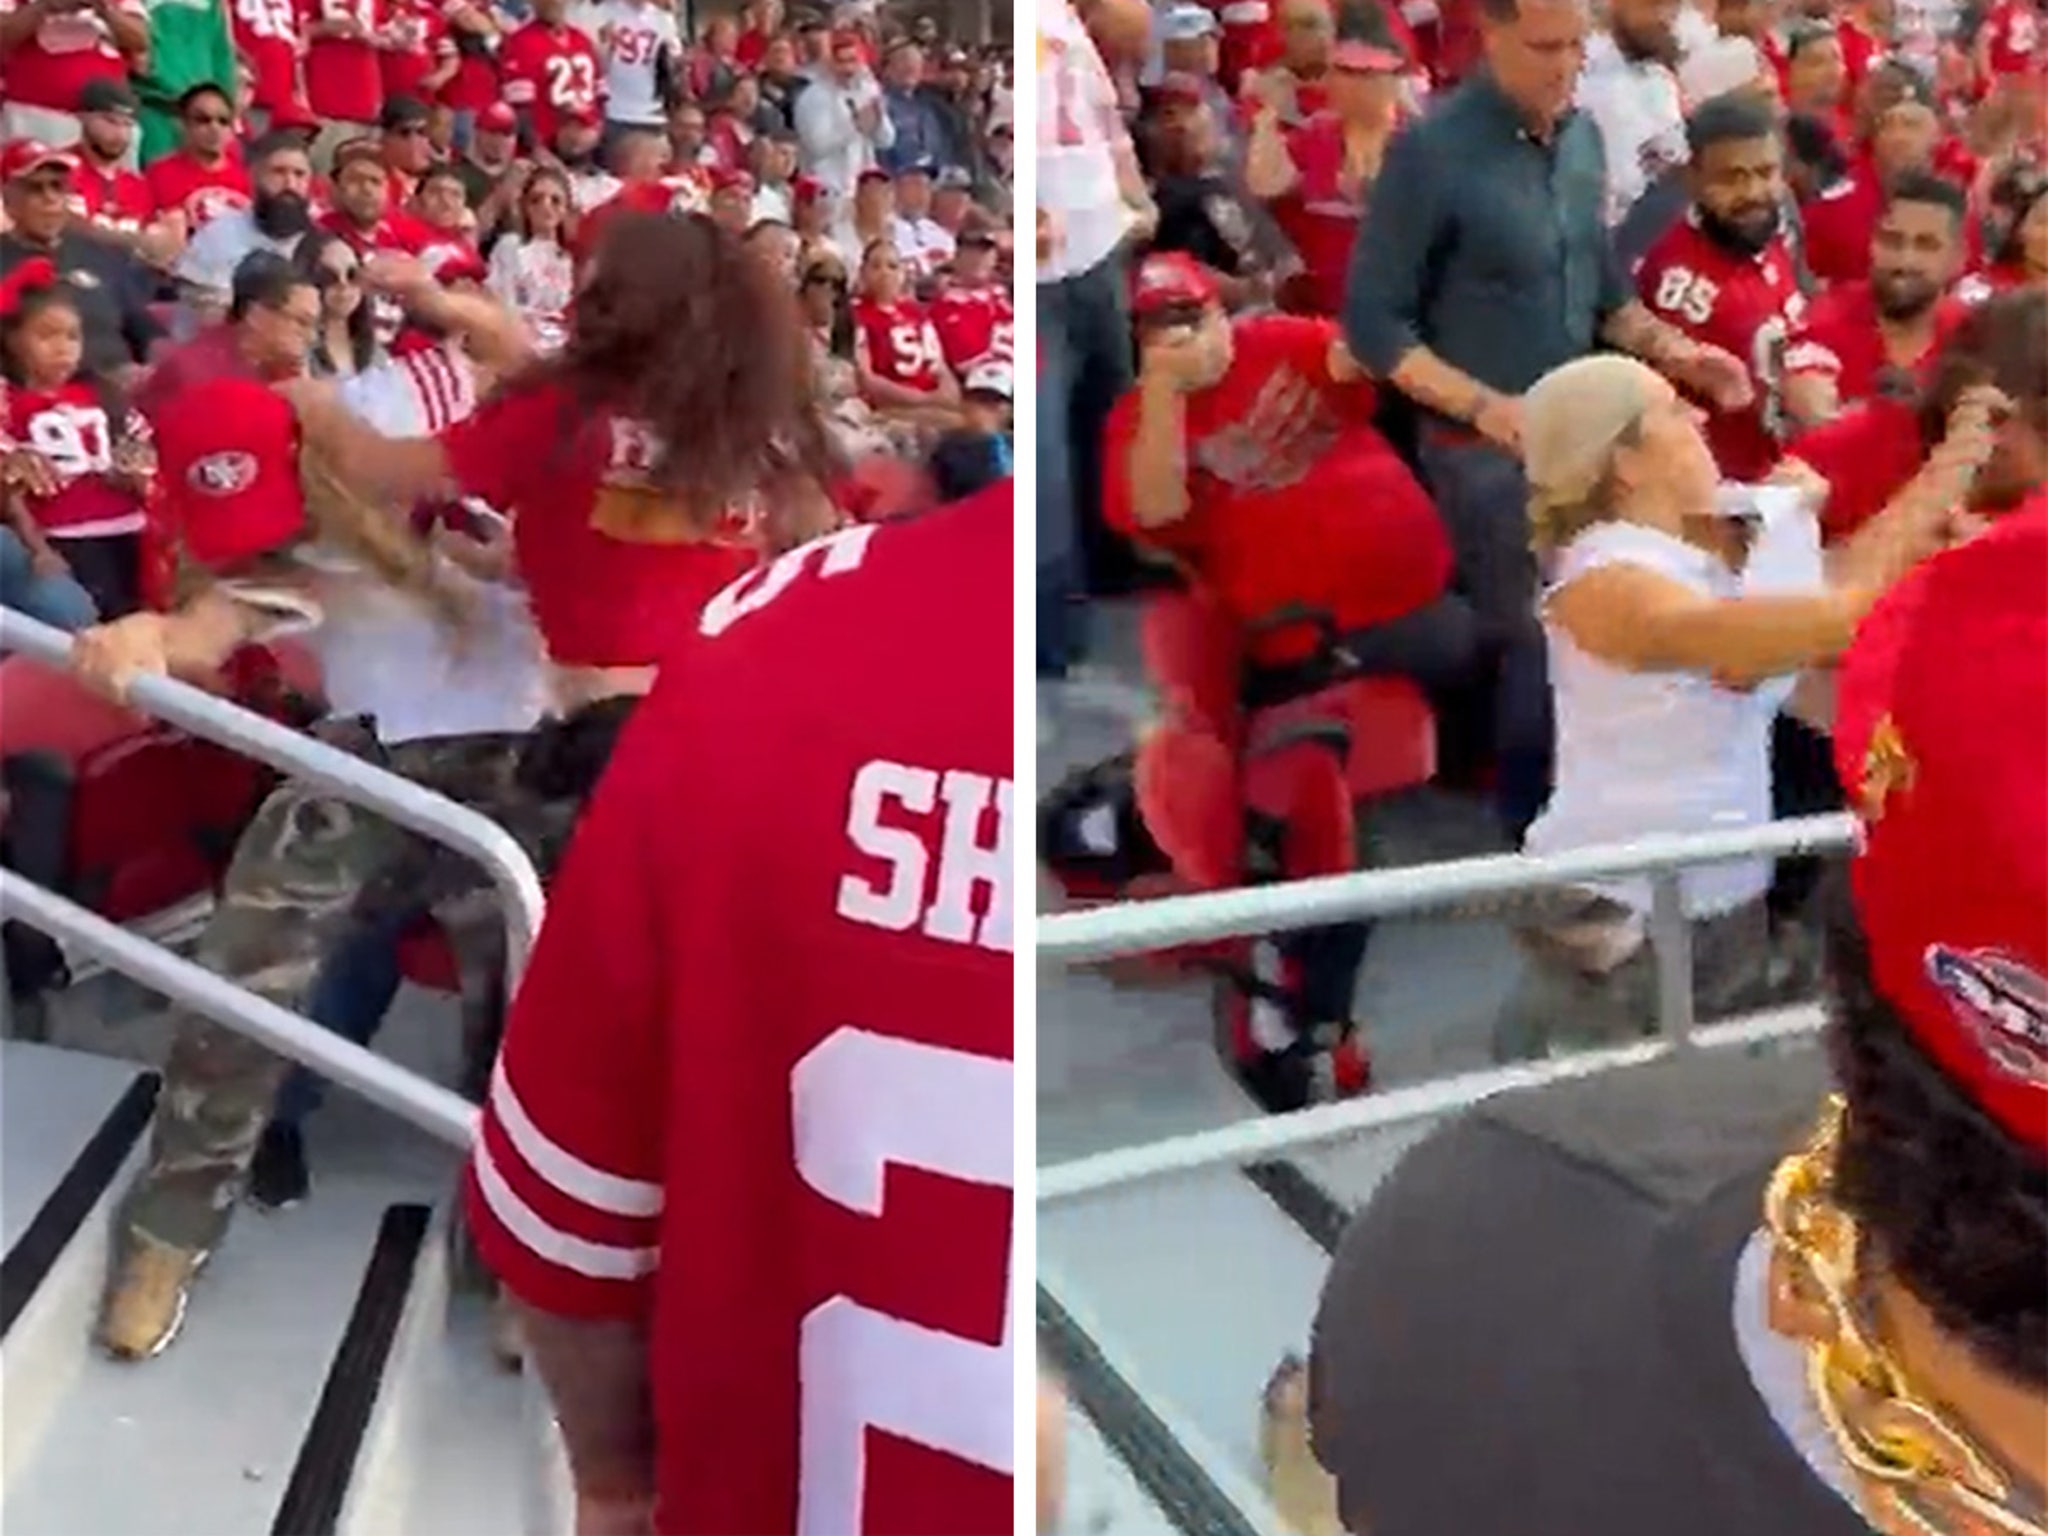 San Francisco 49ers Fan Pulls Woman's Hair In Crazy Brawl At